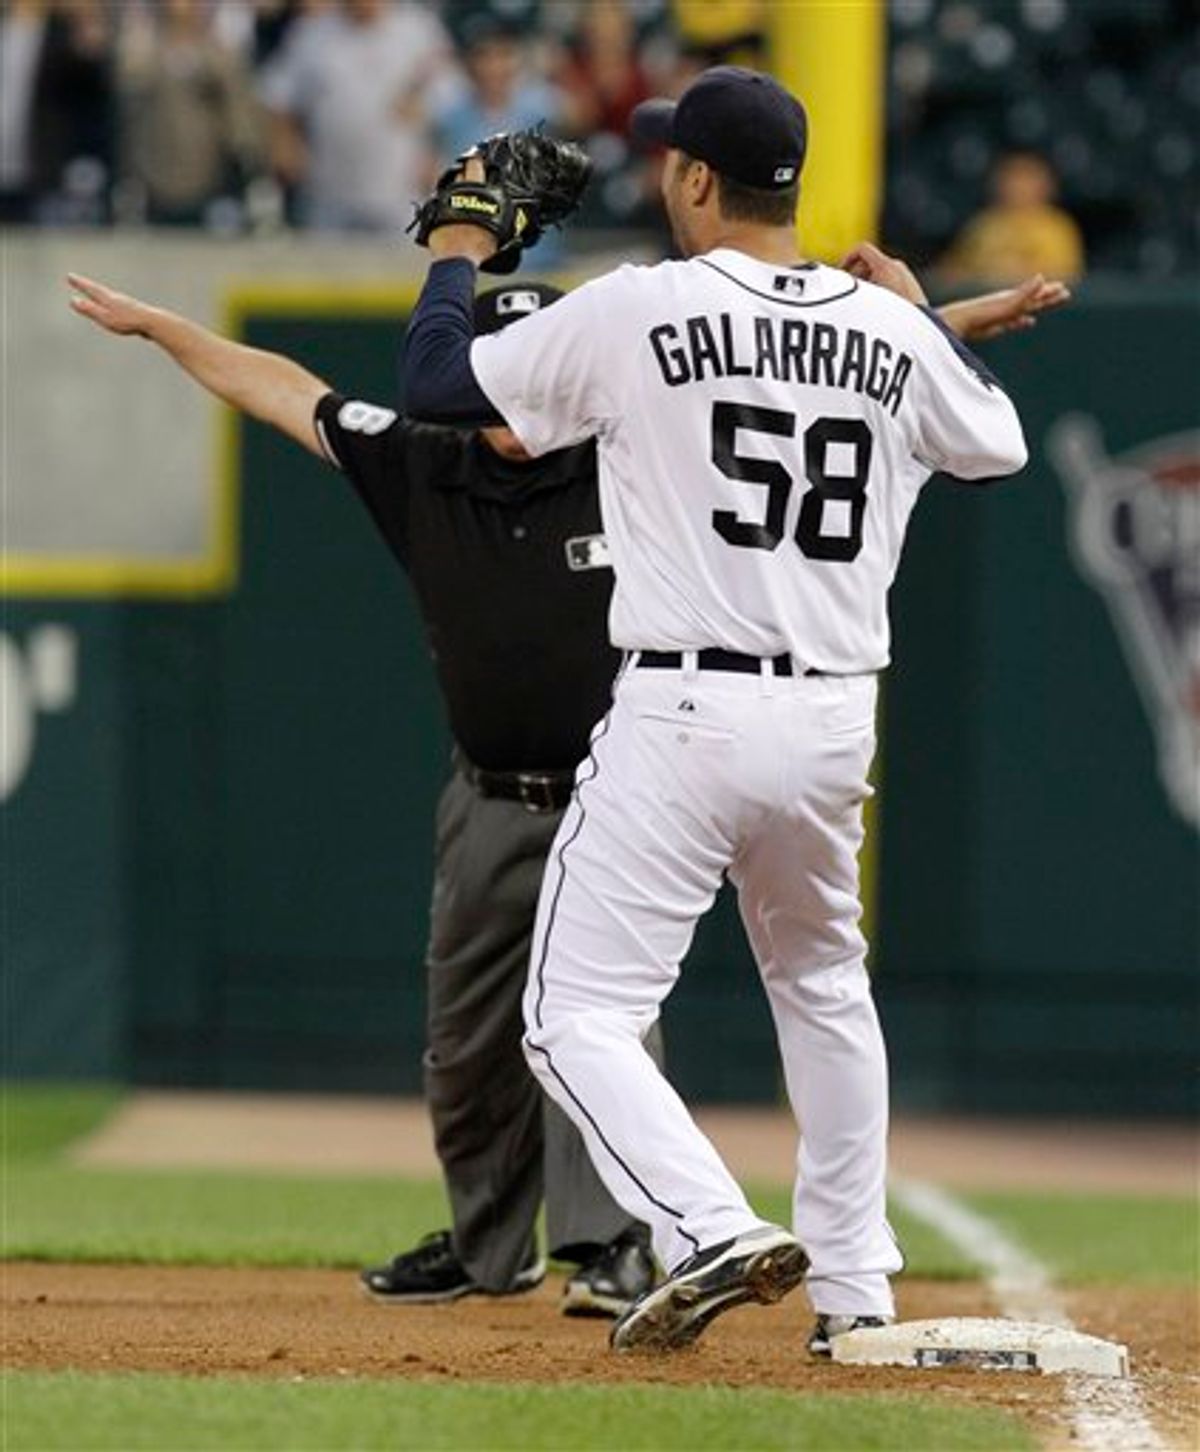 Detroit Tigers pitcher Armando Galarraga (58) looks at first base umpire Jim Joyce (partially obscured) who called Cleveland Indians' Jason Donald safe in the ninth inning of a baseball game in Detroit, Wednesday, June 2, 2010. Galarraga lost his bid for a perfect game with two outs in the ninth inning on the disputed call at first base. Detroit won 3-0. (AP Photo/Paul Sancya) (AP)